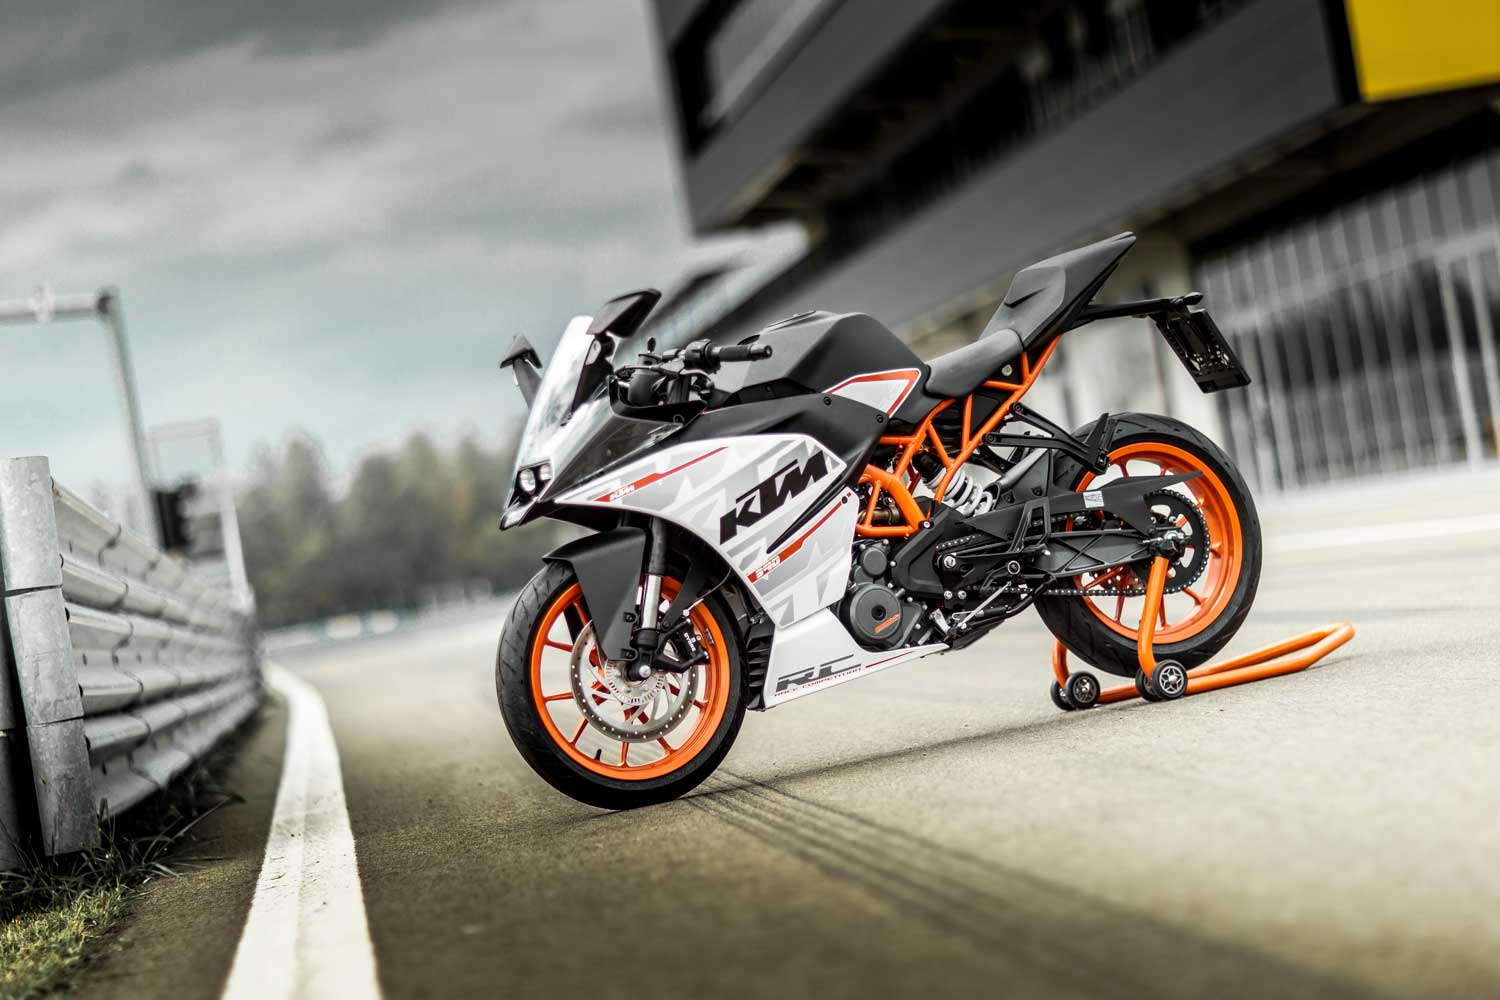 image for 2016 KTM RC 390 HD Latest New & Old Car HD Image